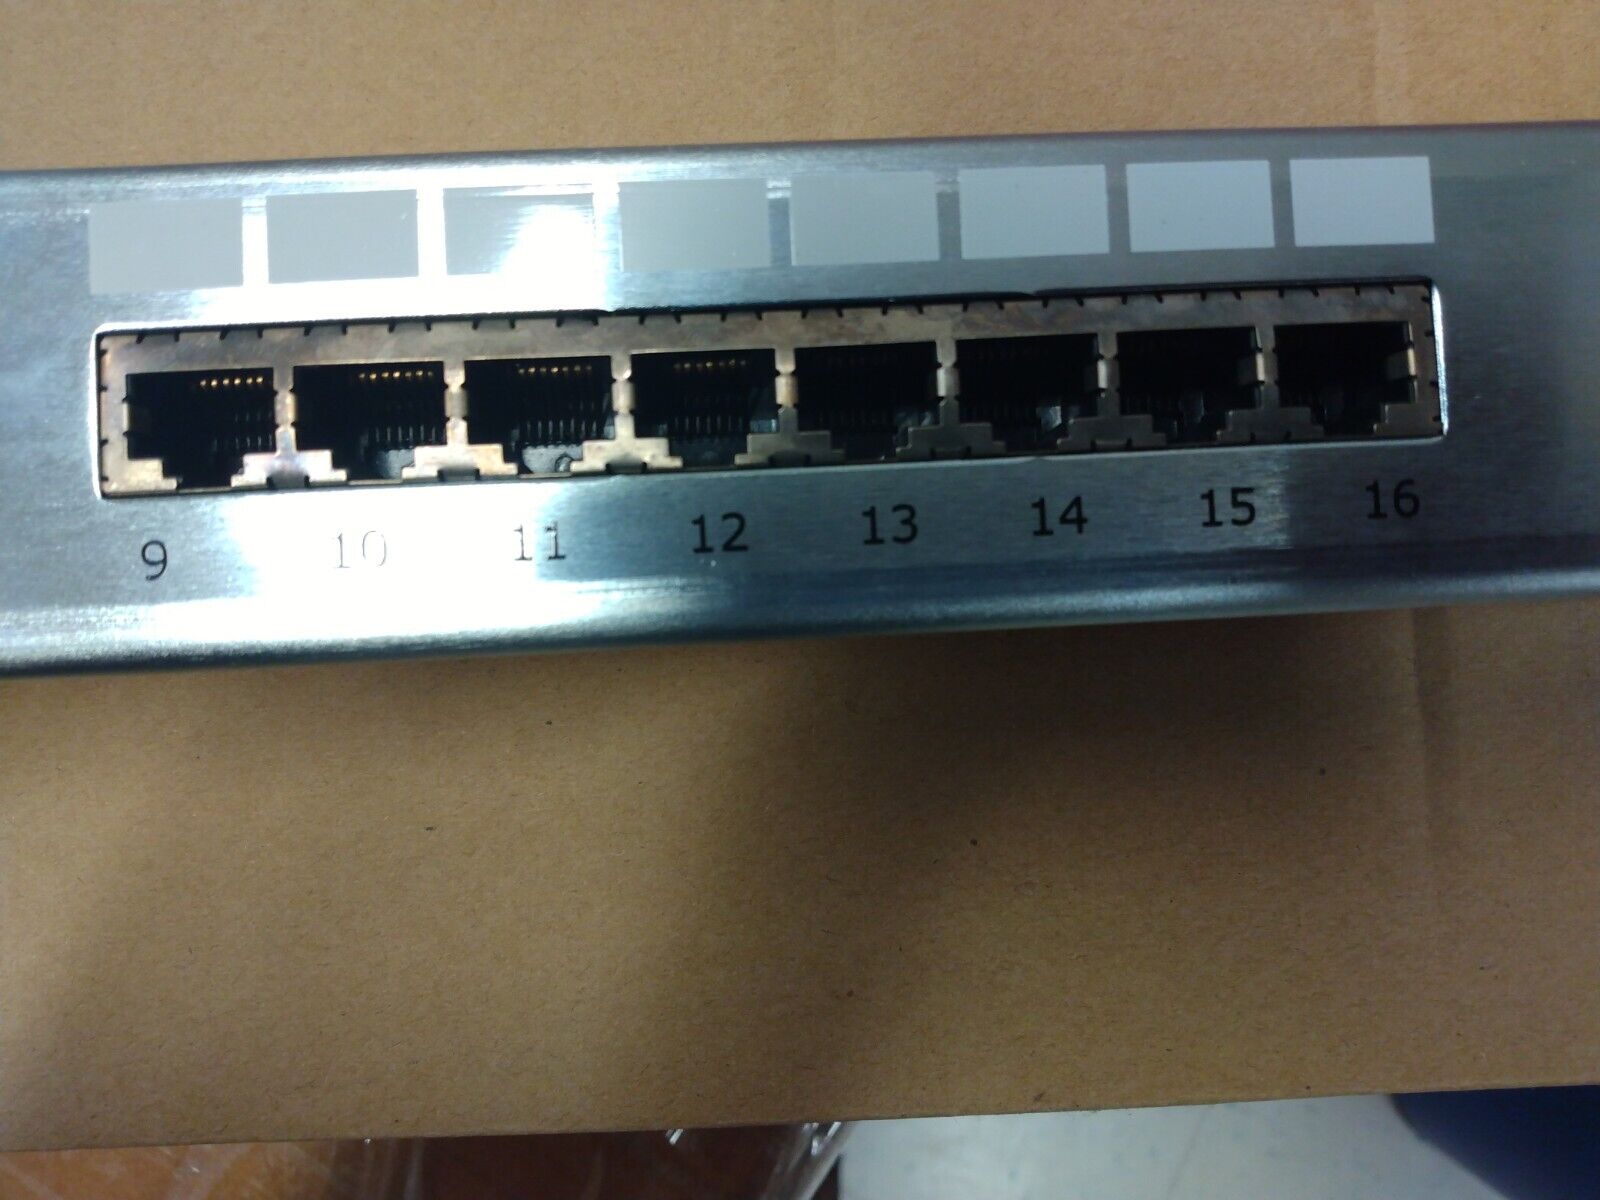 ADC/Natural microsystems NMS patch panel CG6500 series, MMP-CCDBX1-NMS Open Box.